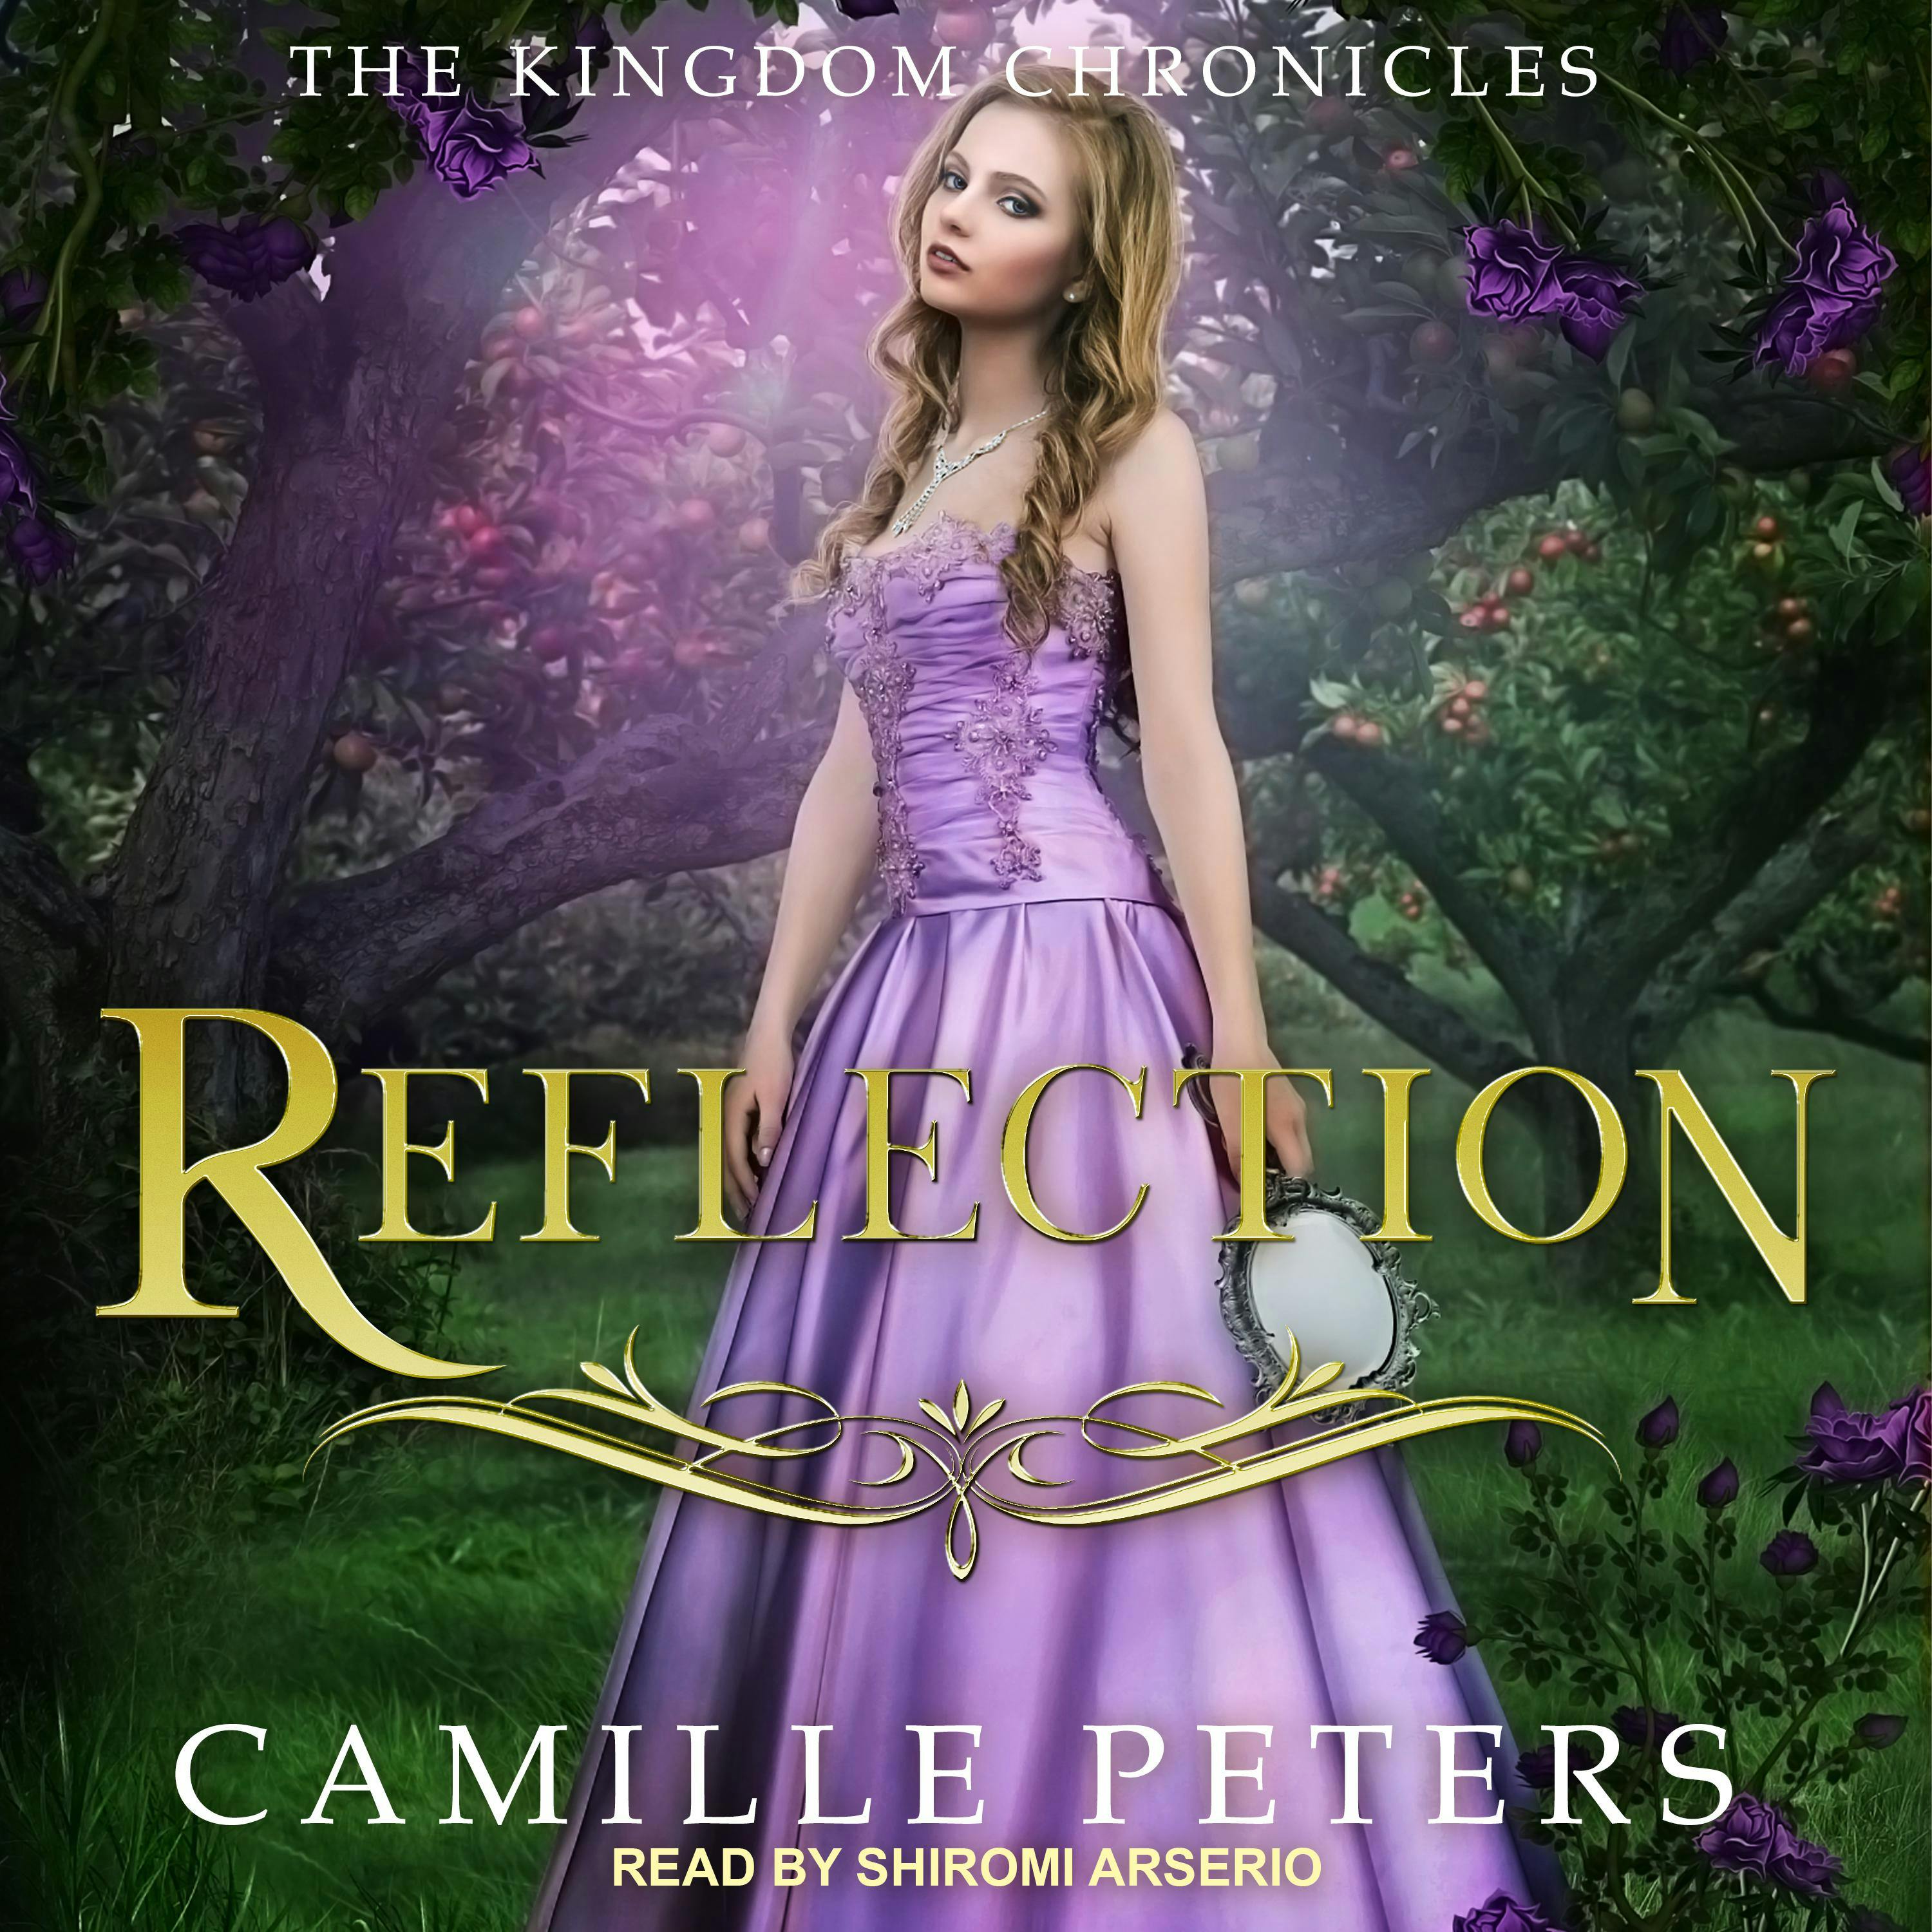 Reflection - Camille Peters